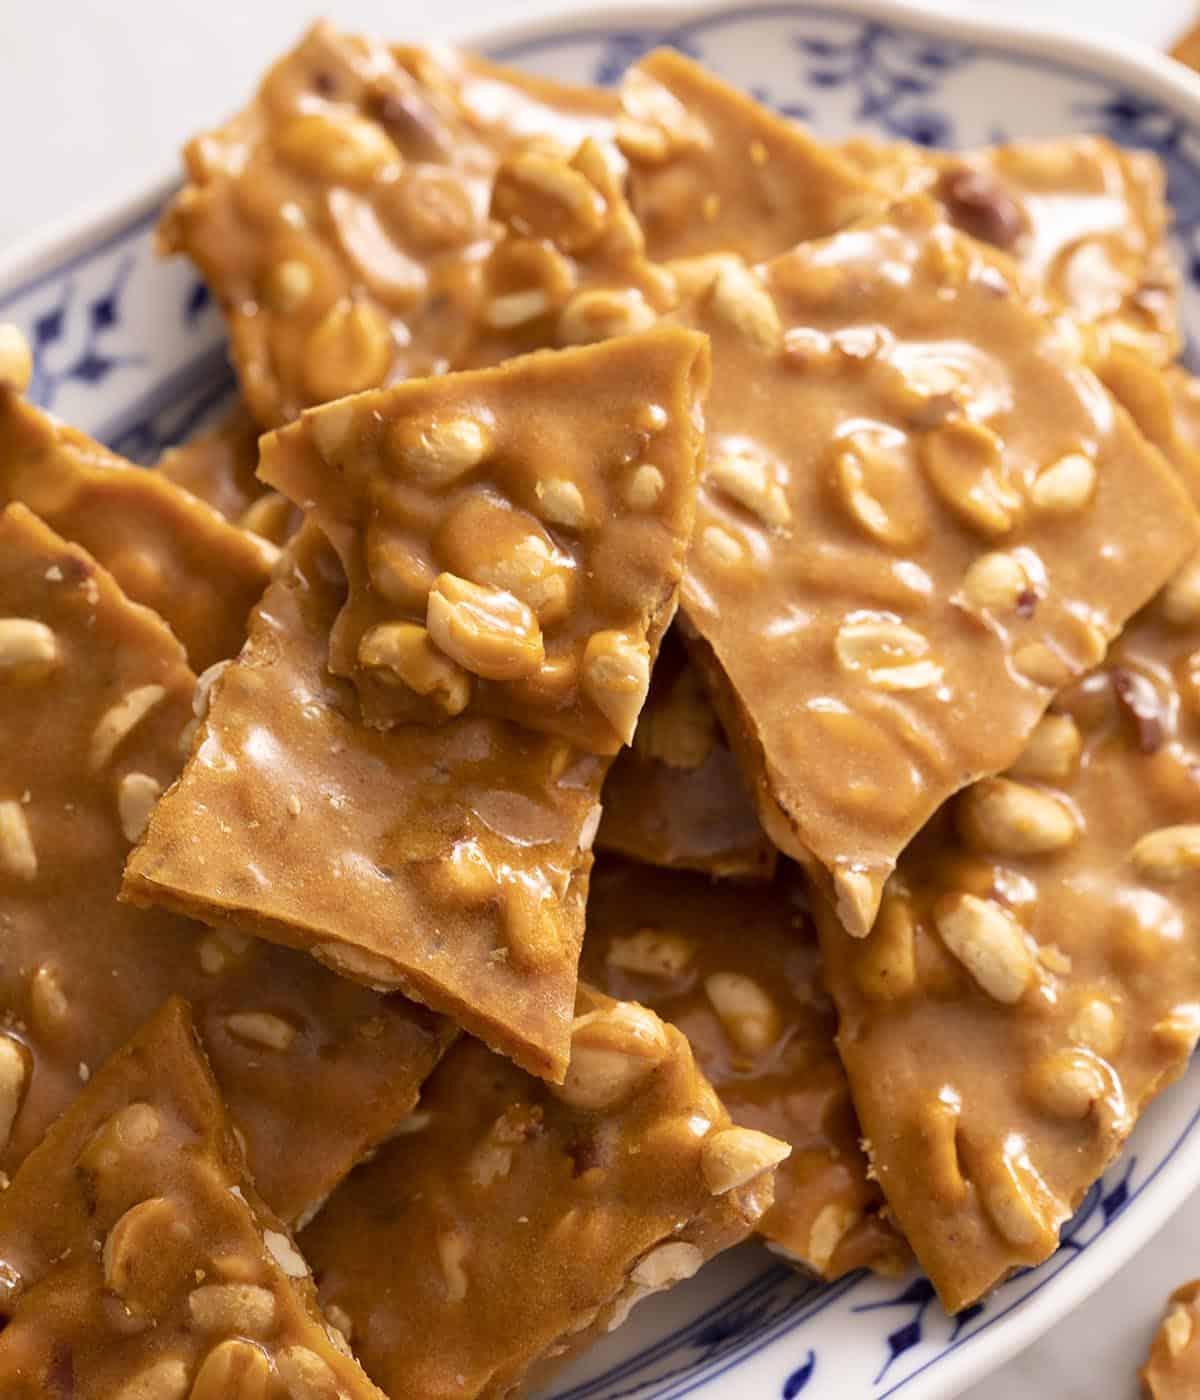 Peanut brittle in a blue and white serving dish. 